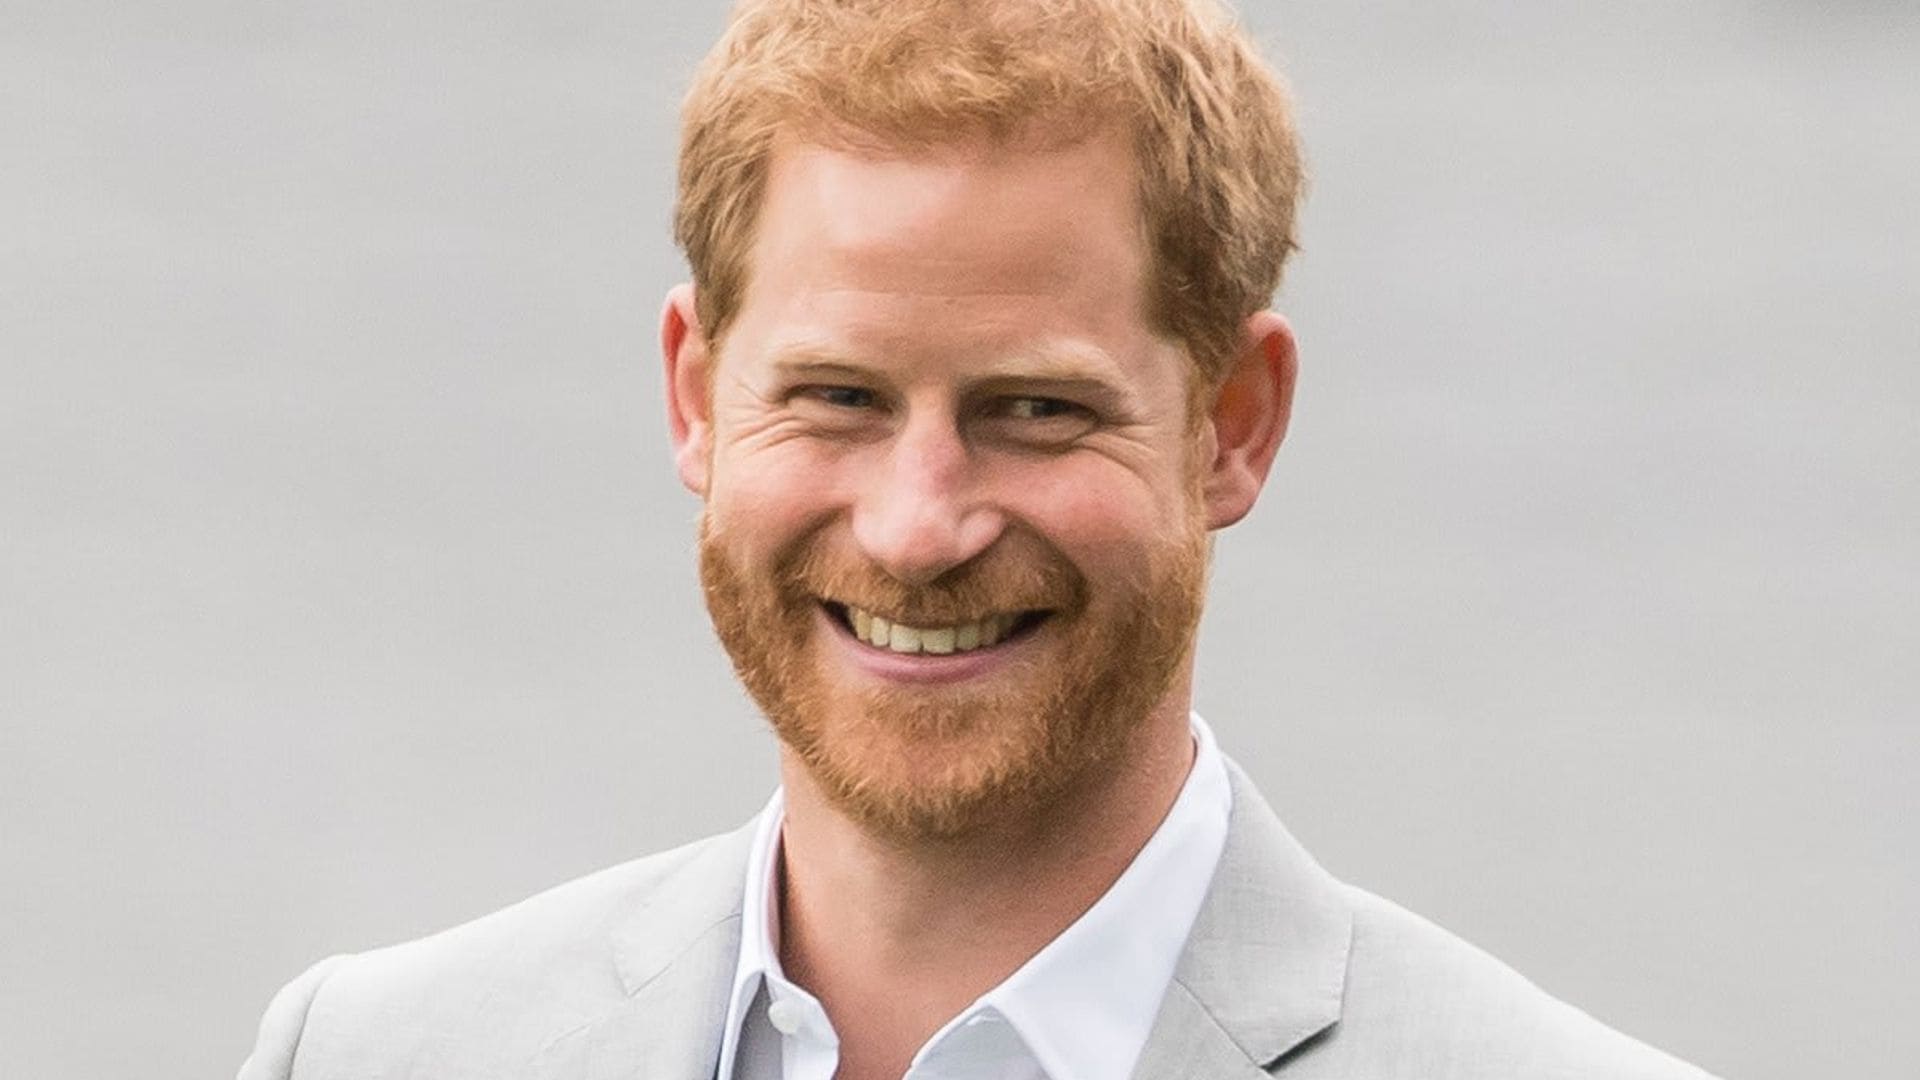 Does Prince Harry actually have a ponytail